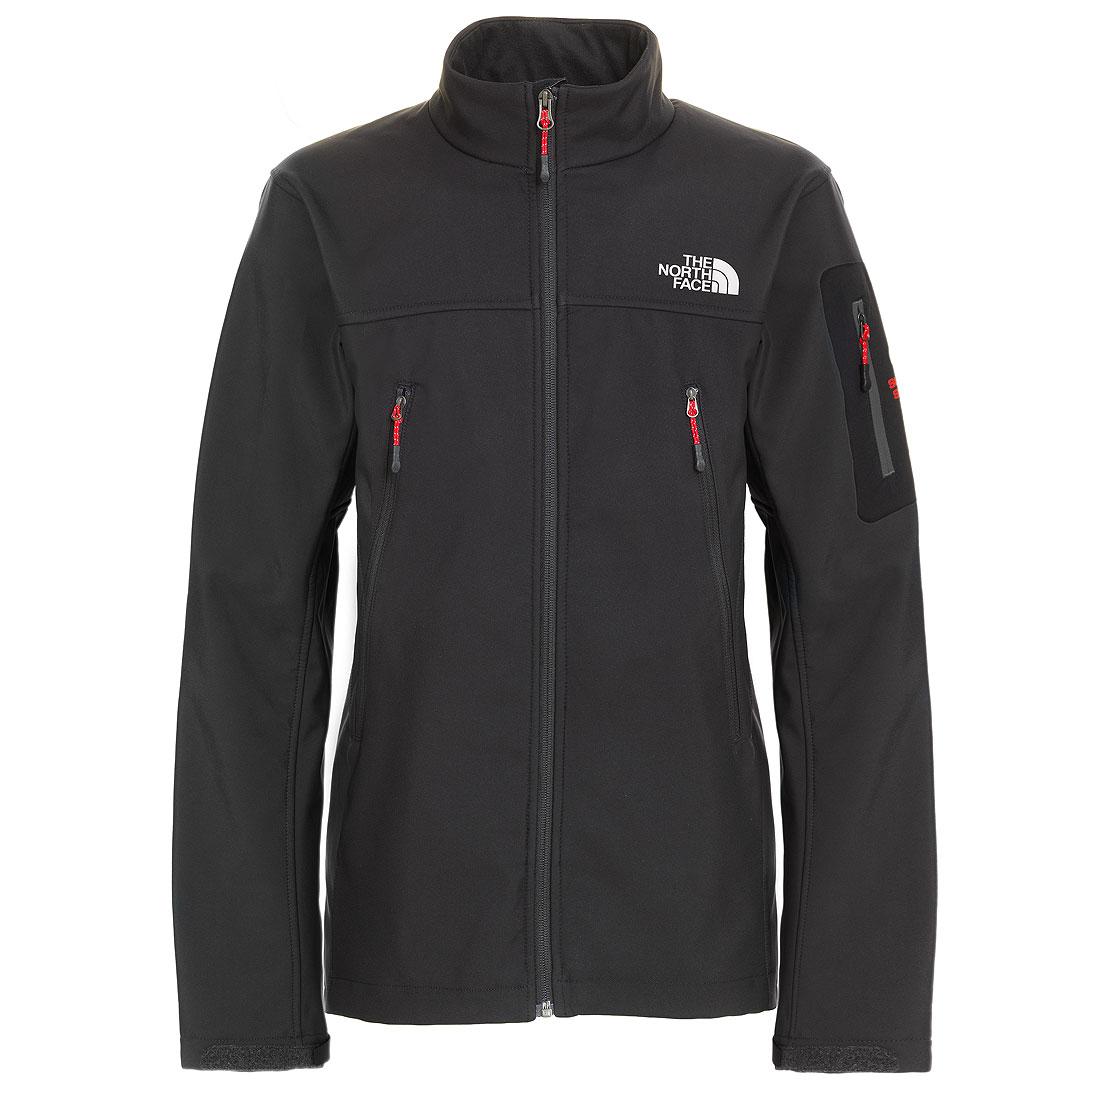 Foto The North Face Gritstone Chaqueta Soft Shell caballeros tnf blac, s